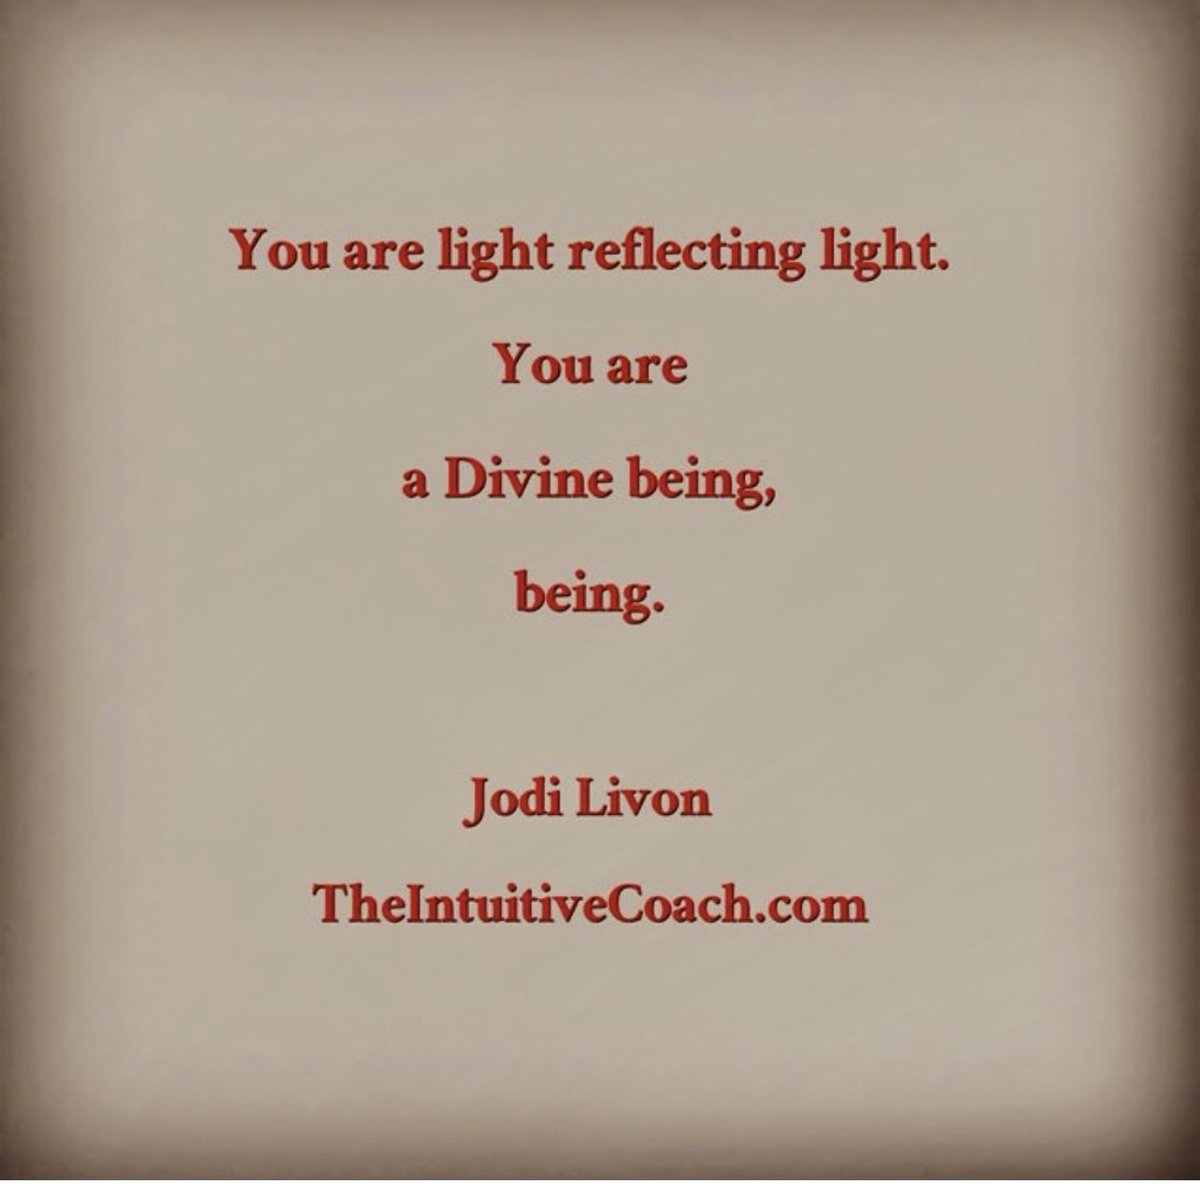 You are a divine being, being. #youaredivine #thehappymedium #Friday #theintuitivecoach